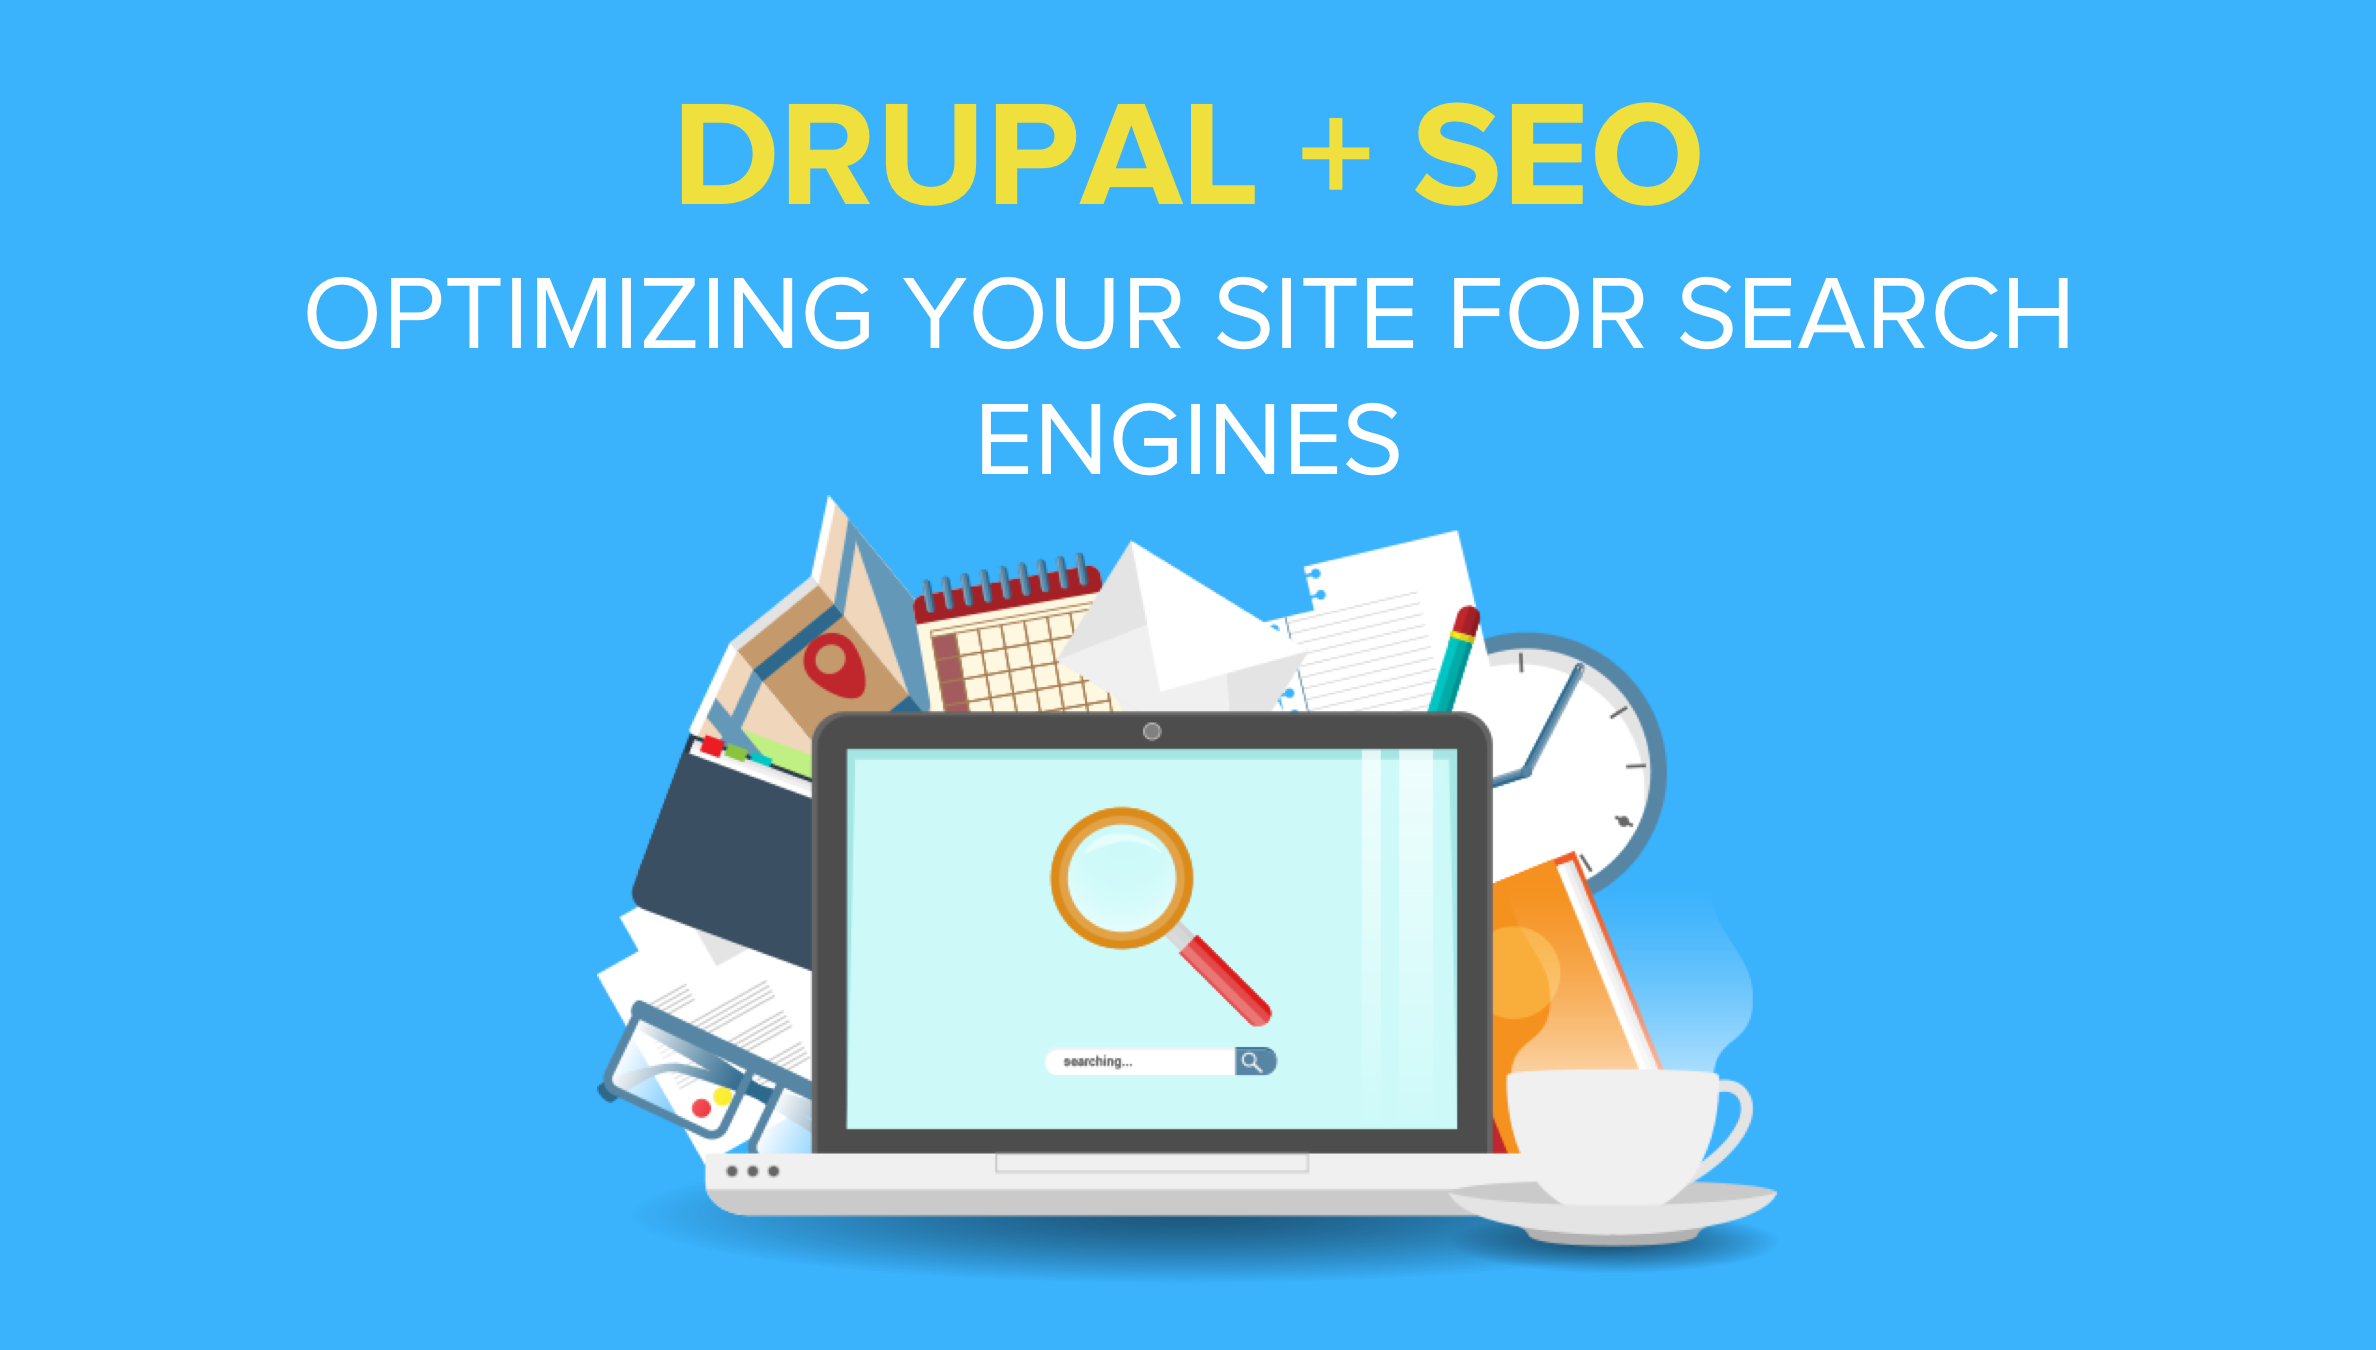 Drupal + SEO: Optimizing Your Site for Search Engines